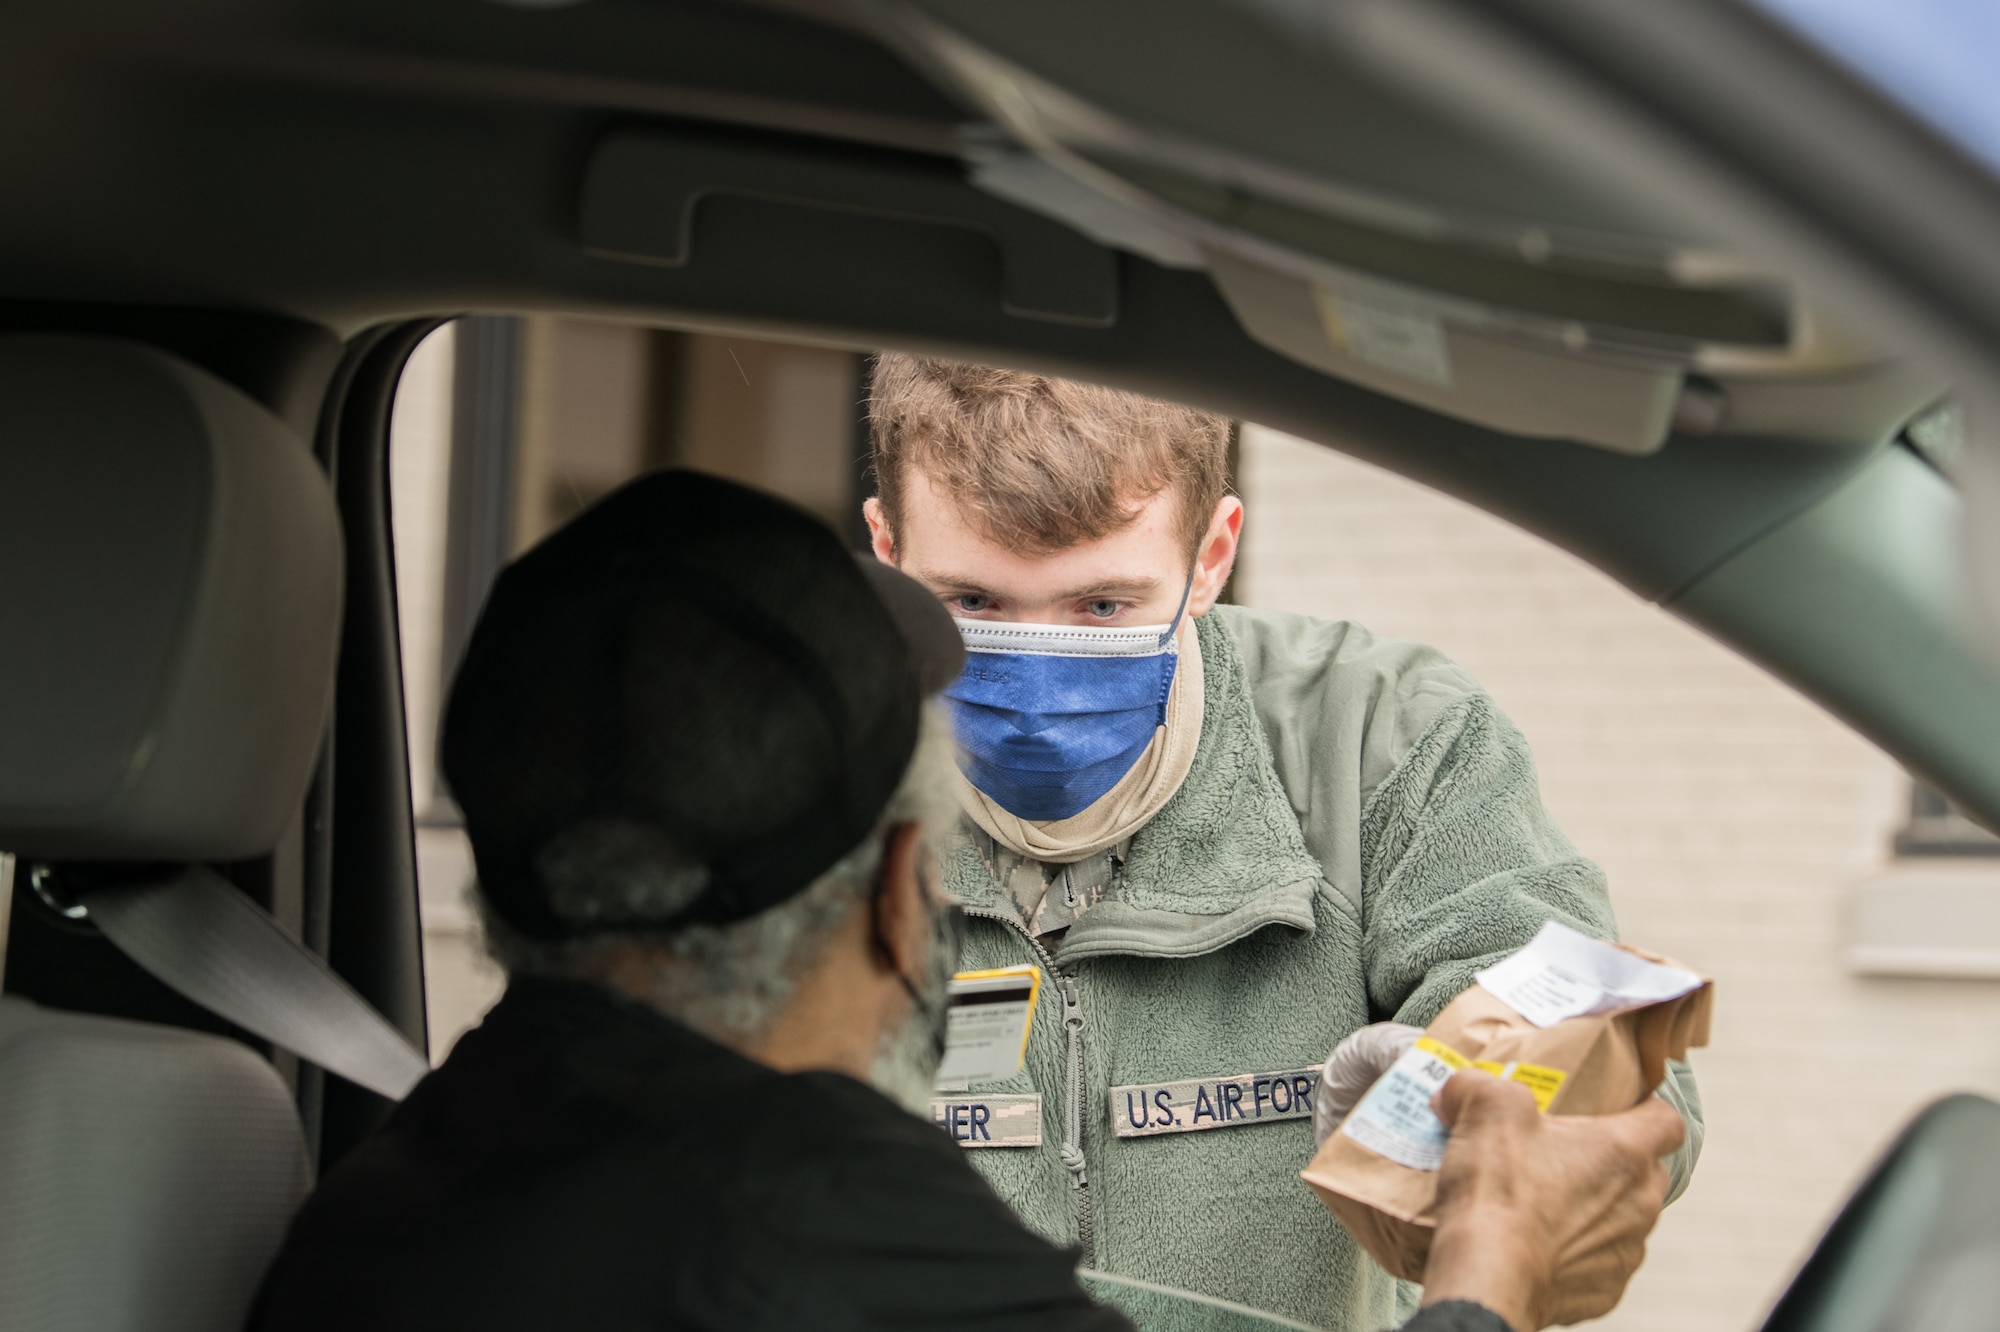 Airman 1st Class Jacob Goucher, 436th Aircraft Maintenance Squadron C-5M apprentice, delivers medicine to a retired Vietnam veteran at a curbside pharmacy, April 18, 2020, at Dover Air Force Base, Delaware. The 436th Medical Group began offering this drive-thru service on April 13, 2020 to reduce the number of visitors inside the clinic and help mitigate the spread of COVID-19. (U.S. Air Force photo by Mauricio Campino)